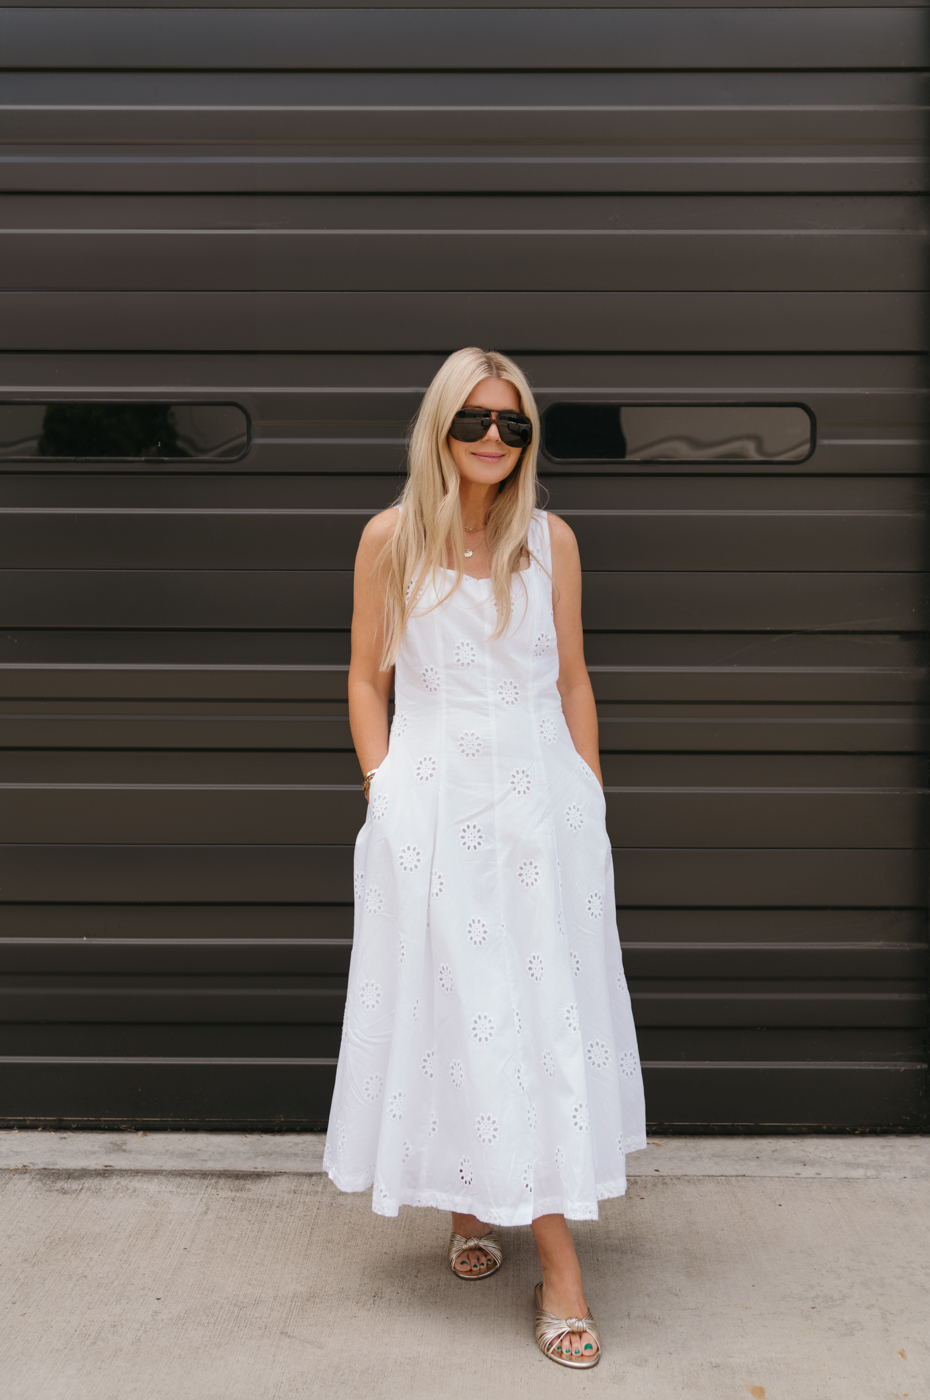 Summer Style With Walmart by Salty Lashes Blogger Lisa Allen: wearing white eyelet dress